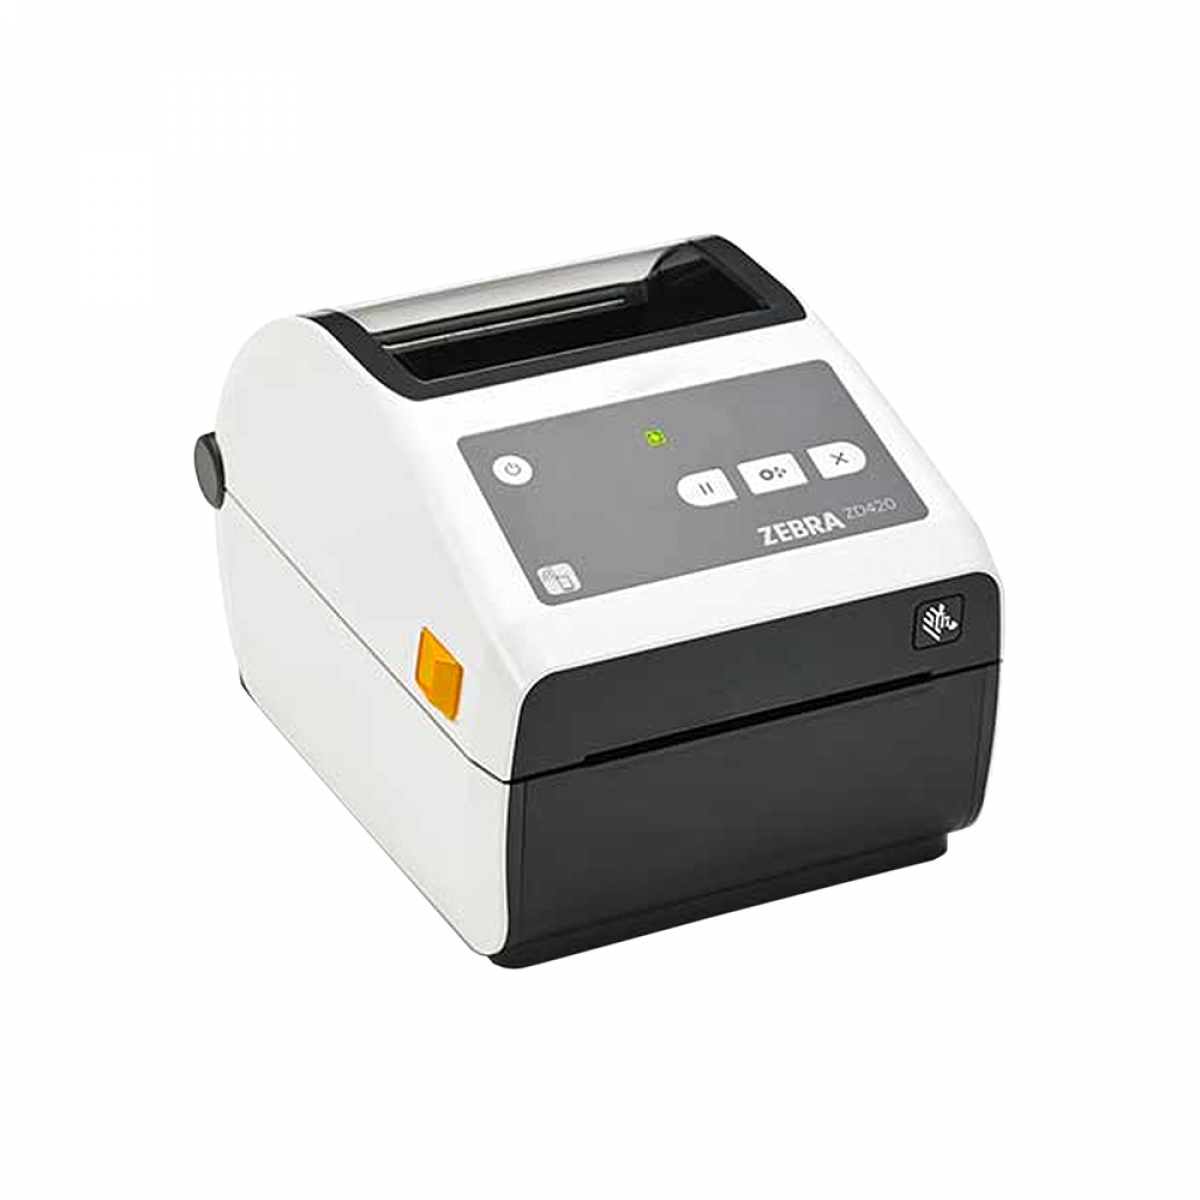 Zebra ZD420d-HC with mobile pair and print functionality